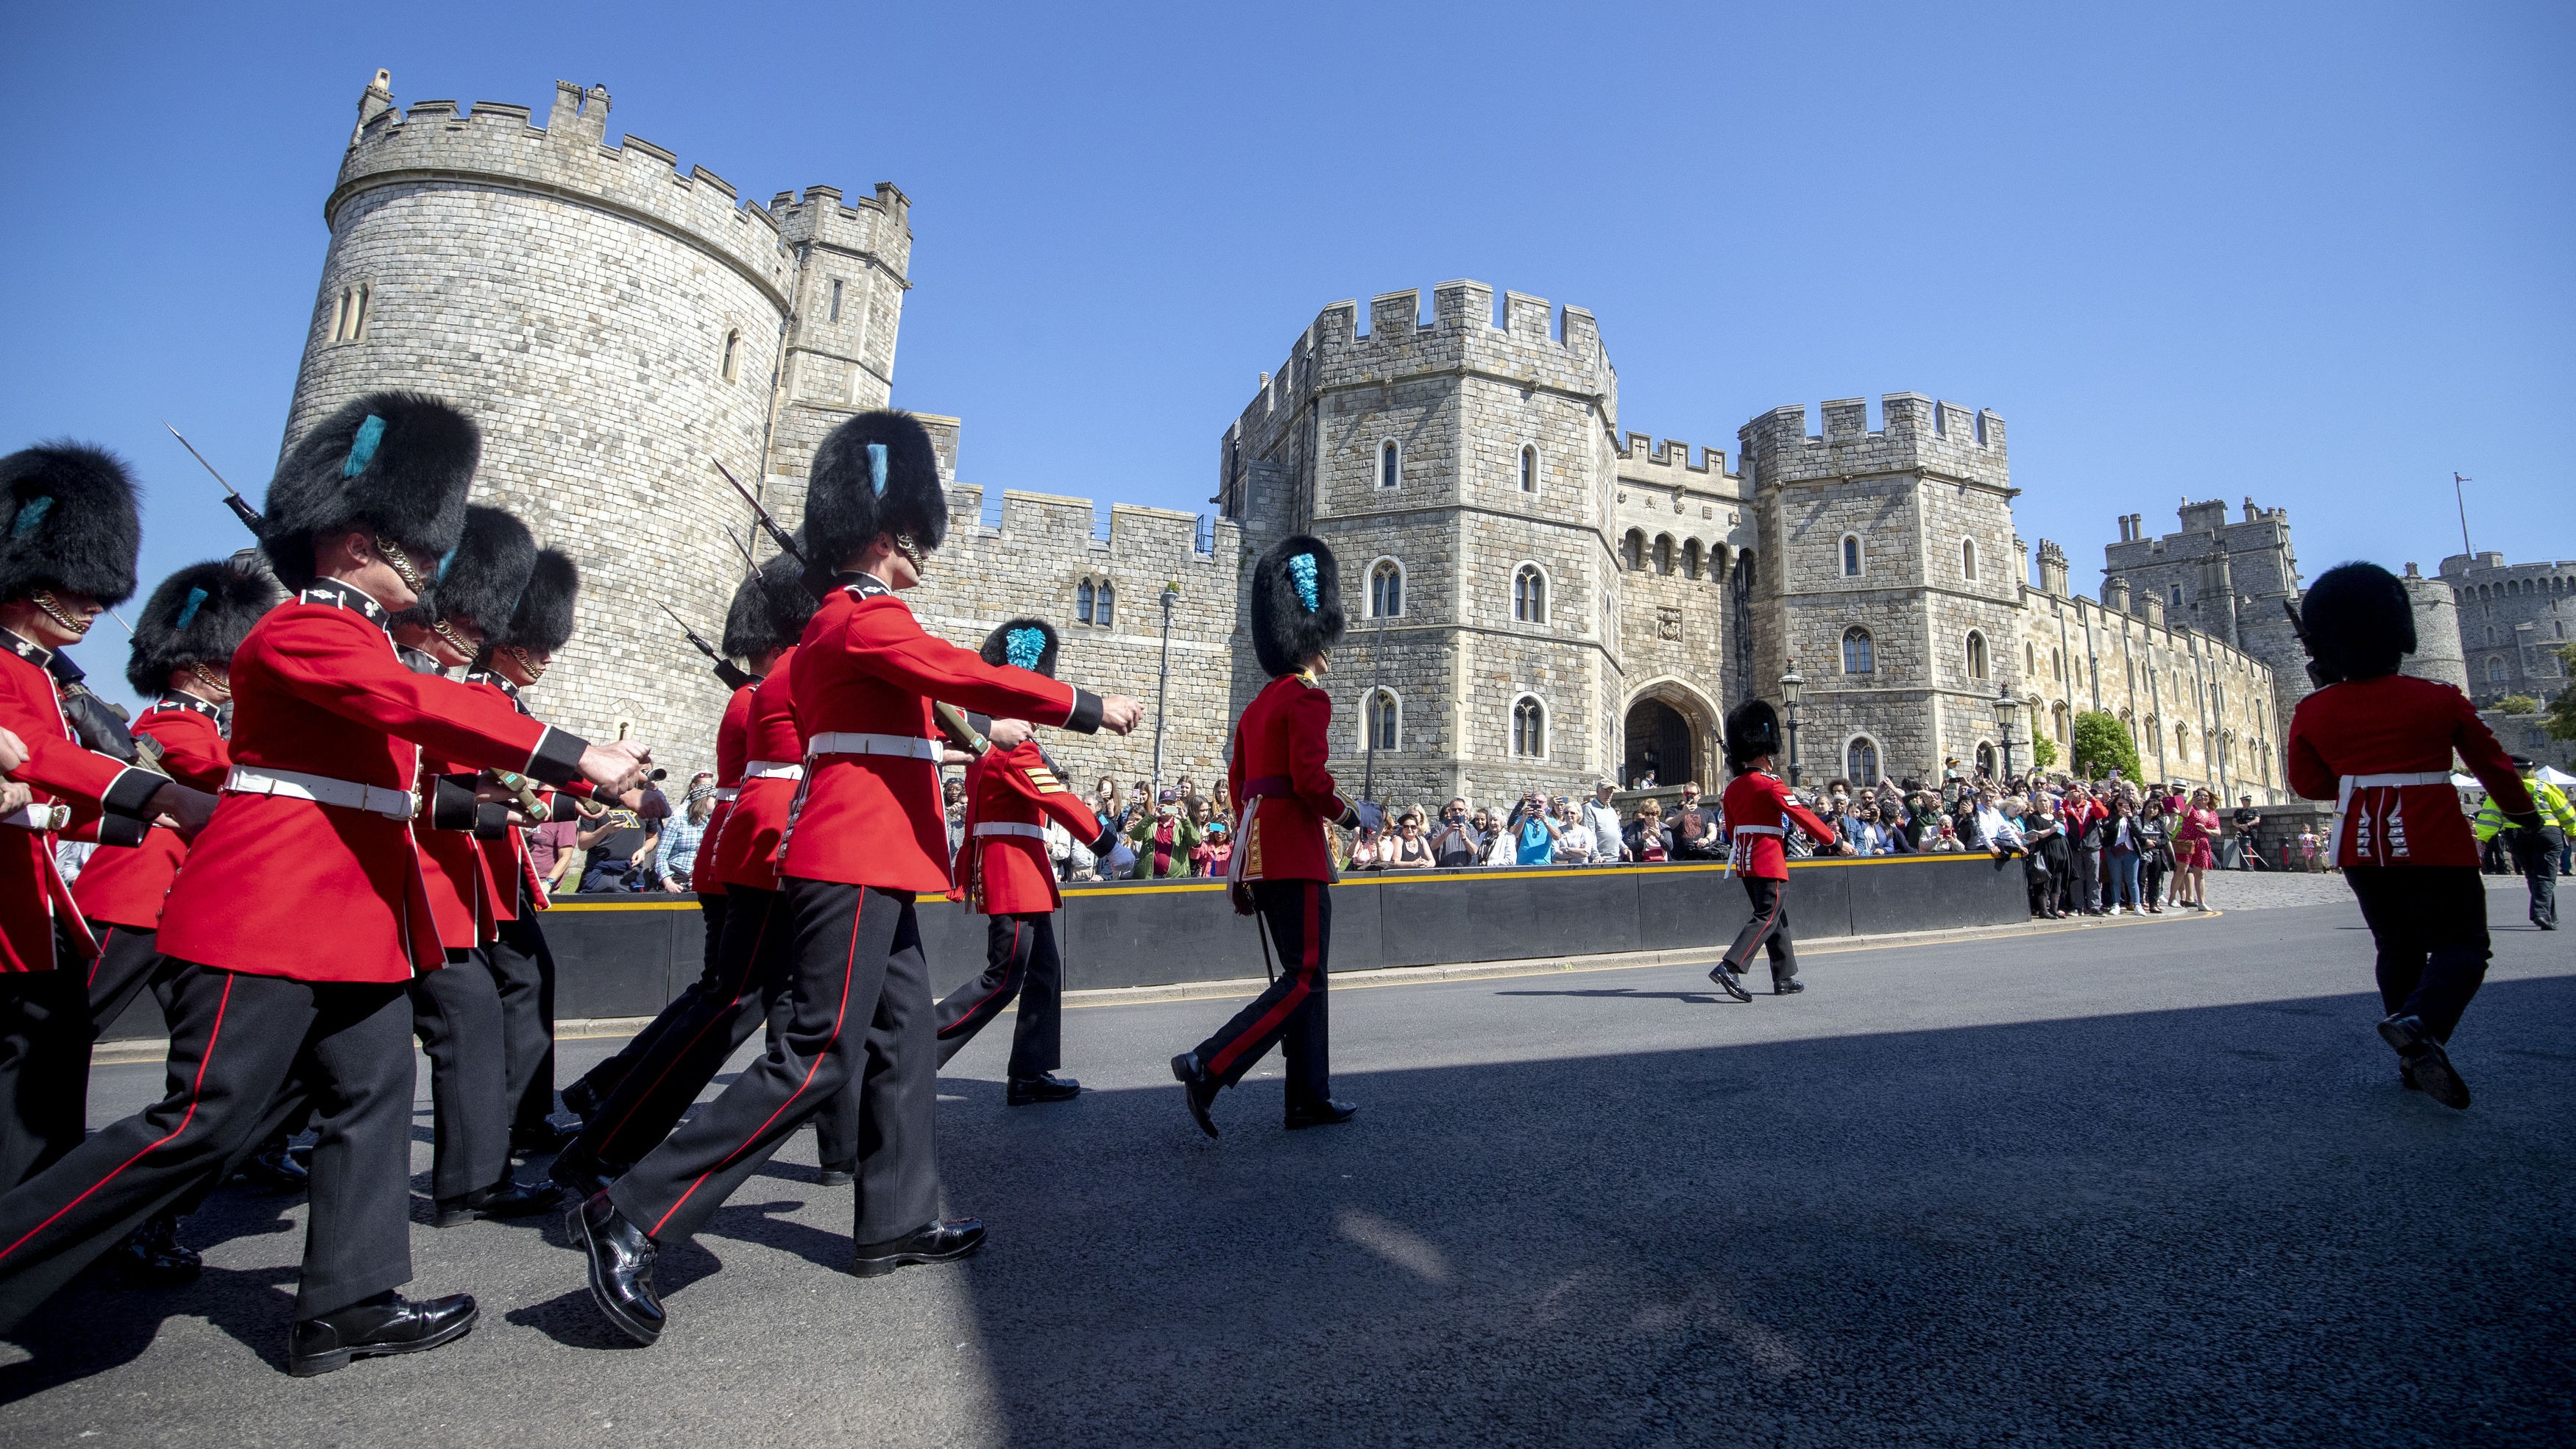 Royal wedding fever strikes Windsor as excitement builds for Harry and Meghan | BT3500 x 1969